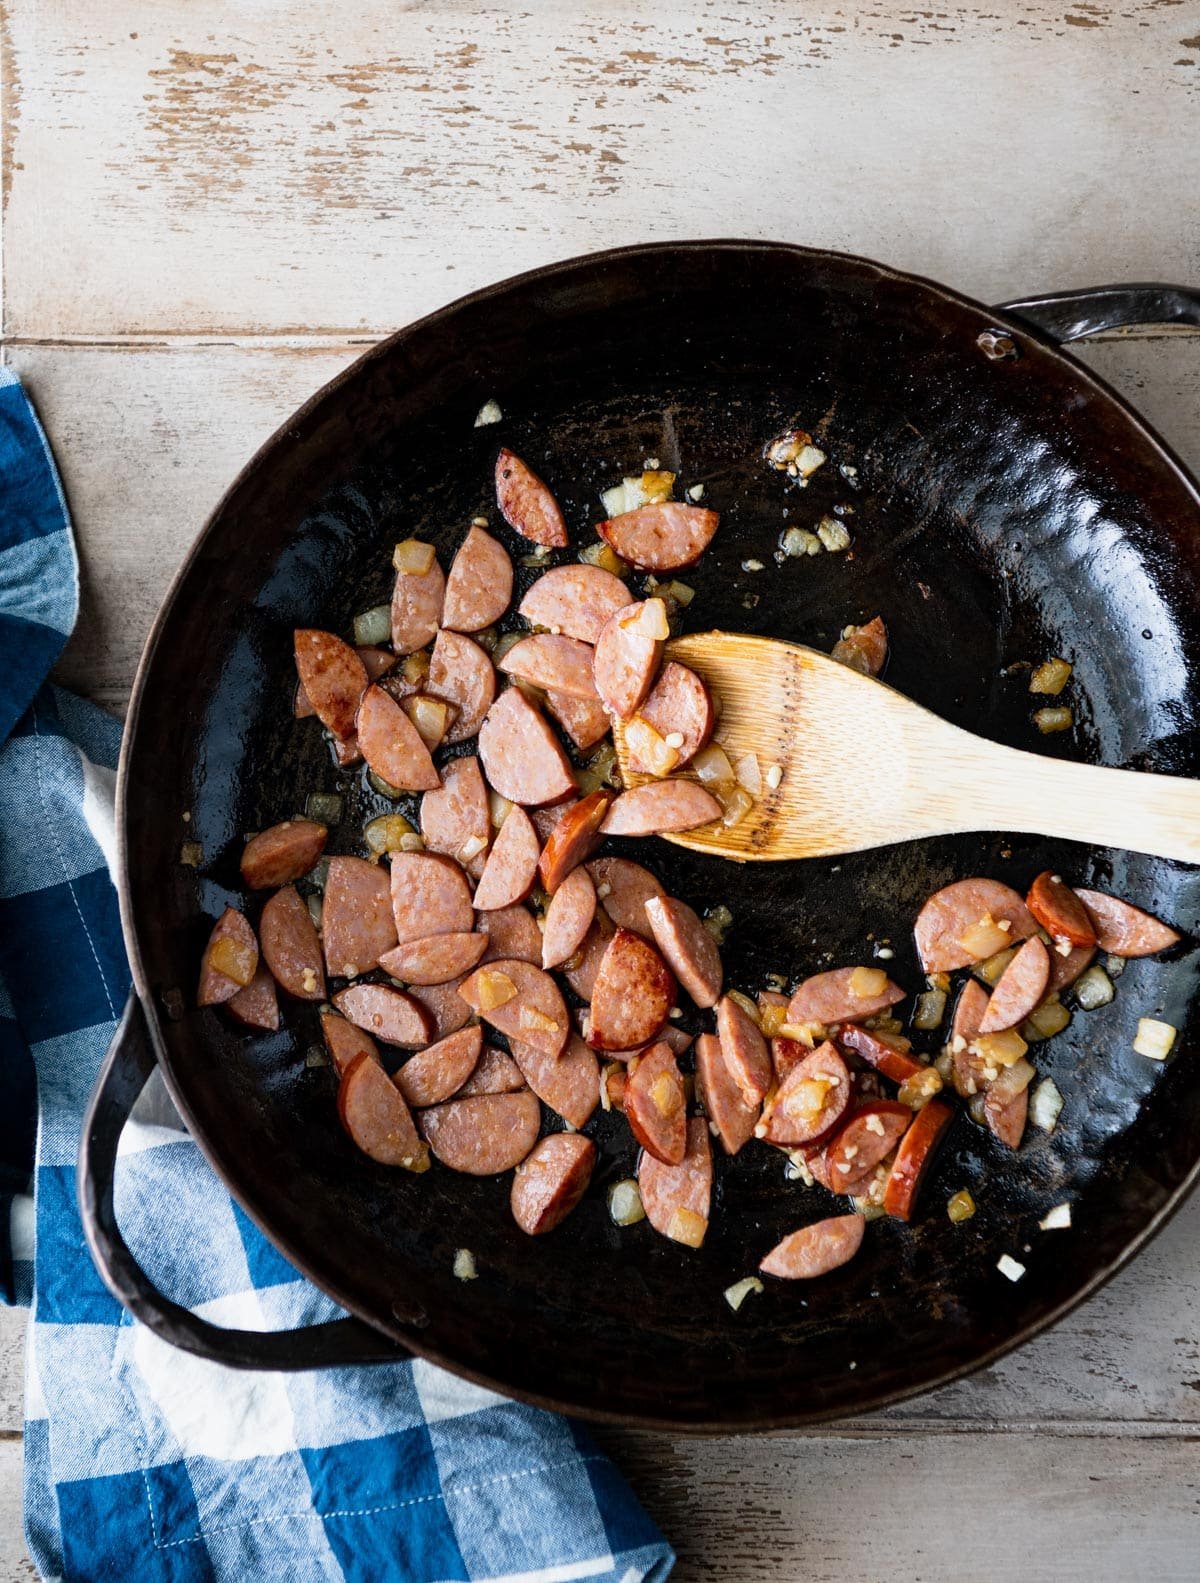 Sauteing andouille sausage in a cast iron skillet.